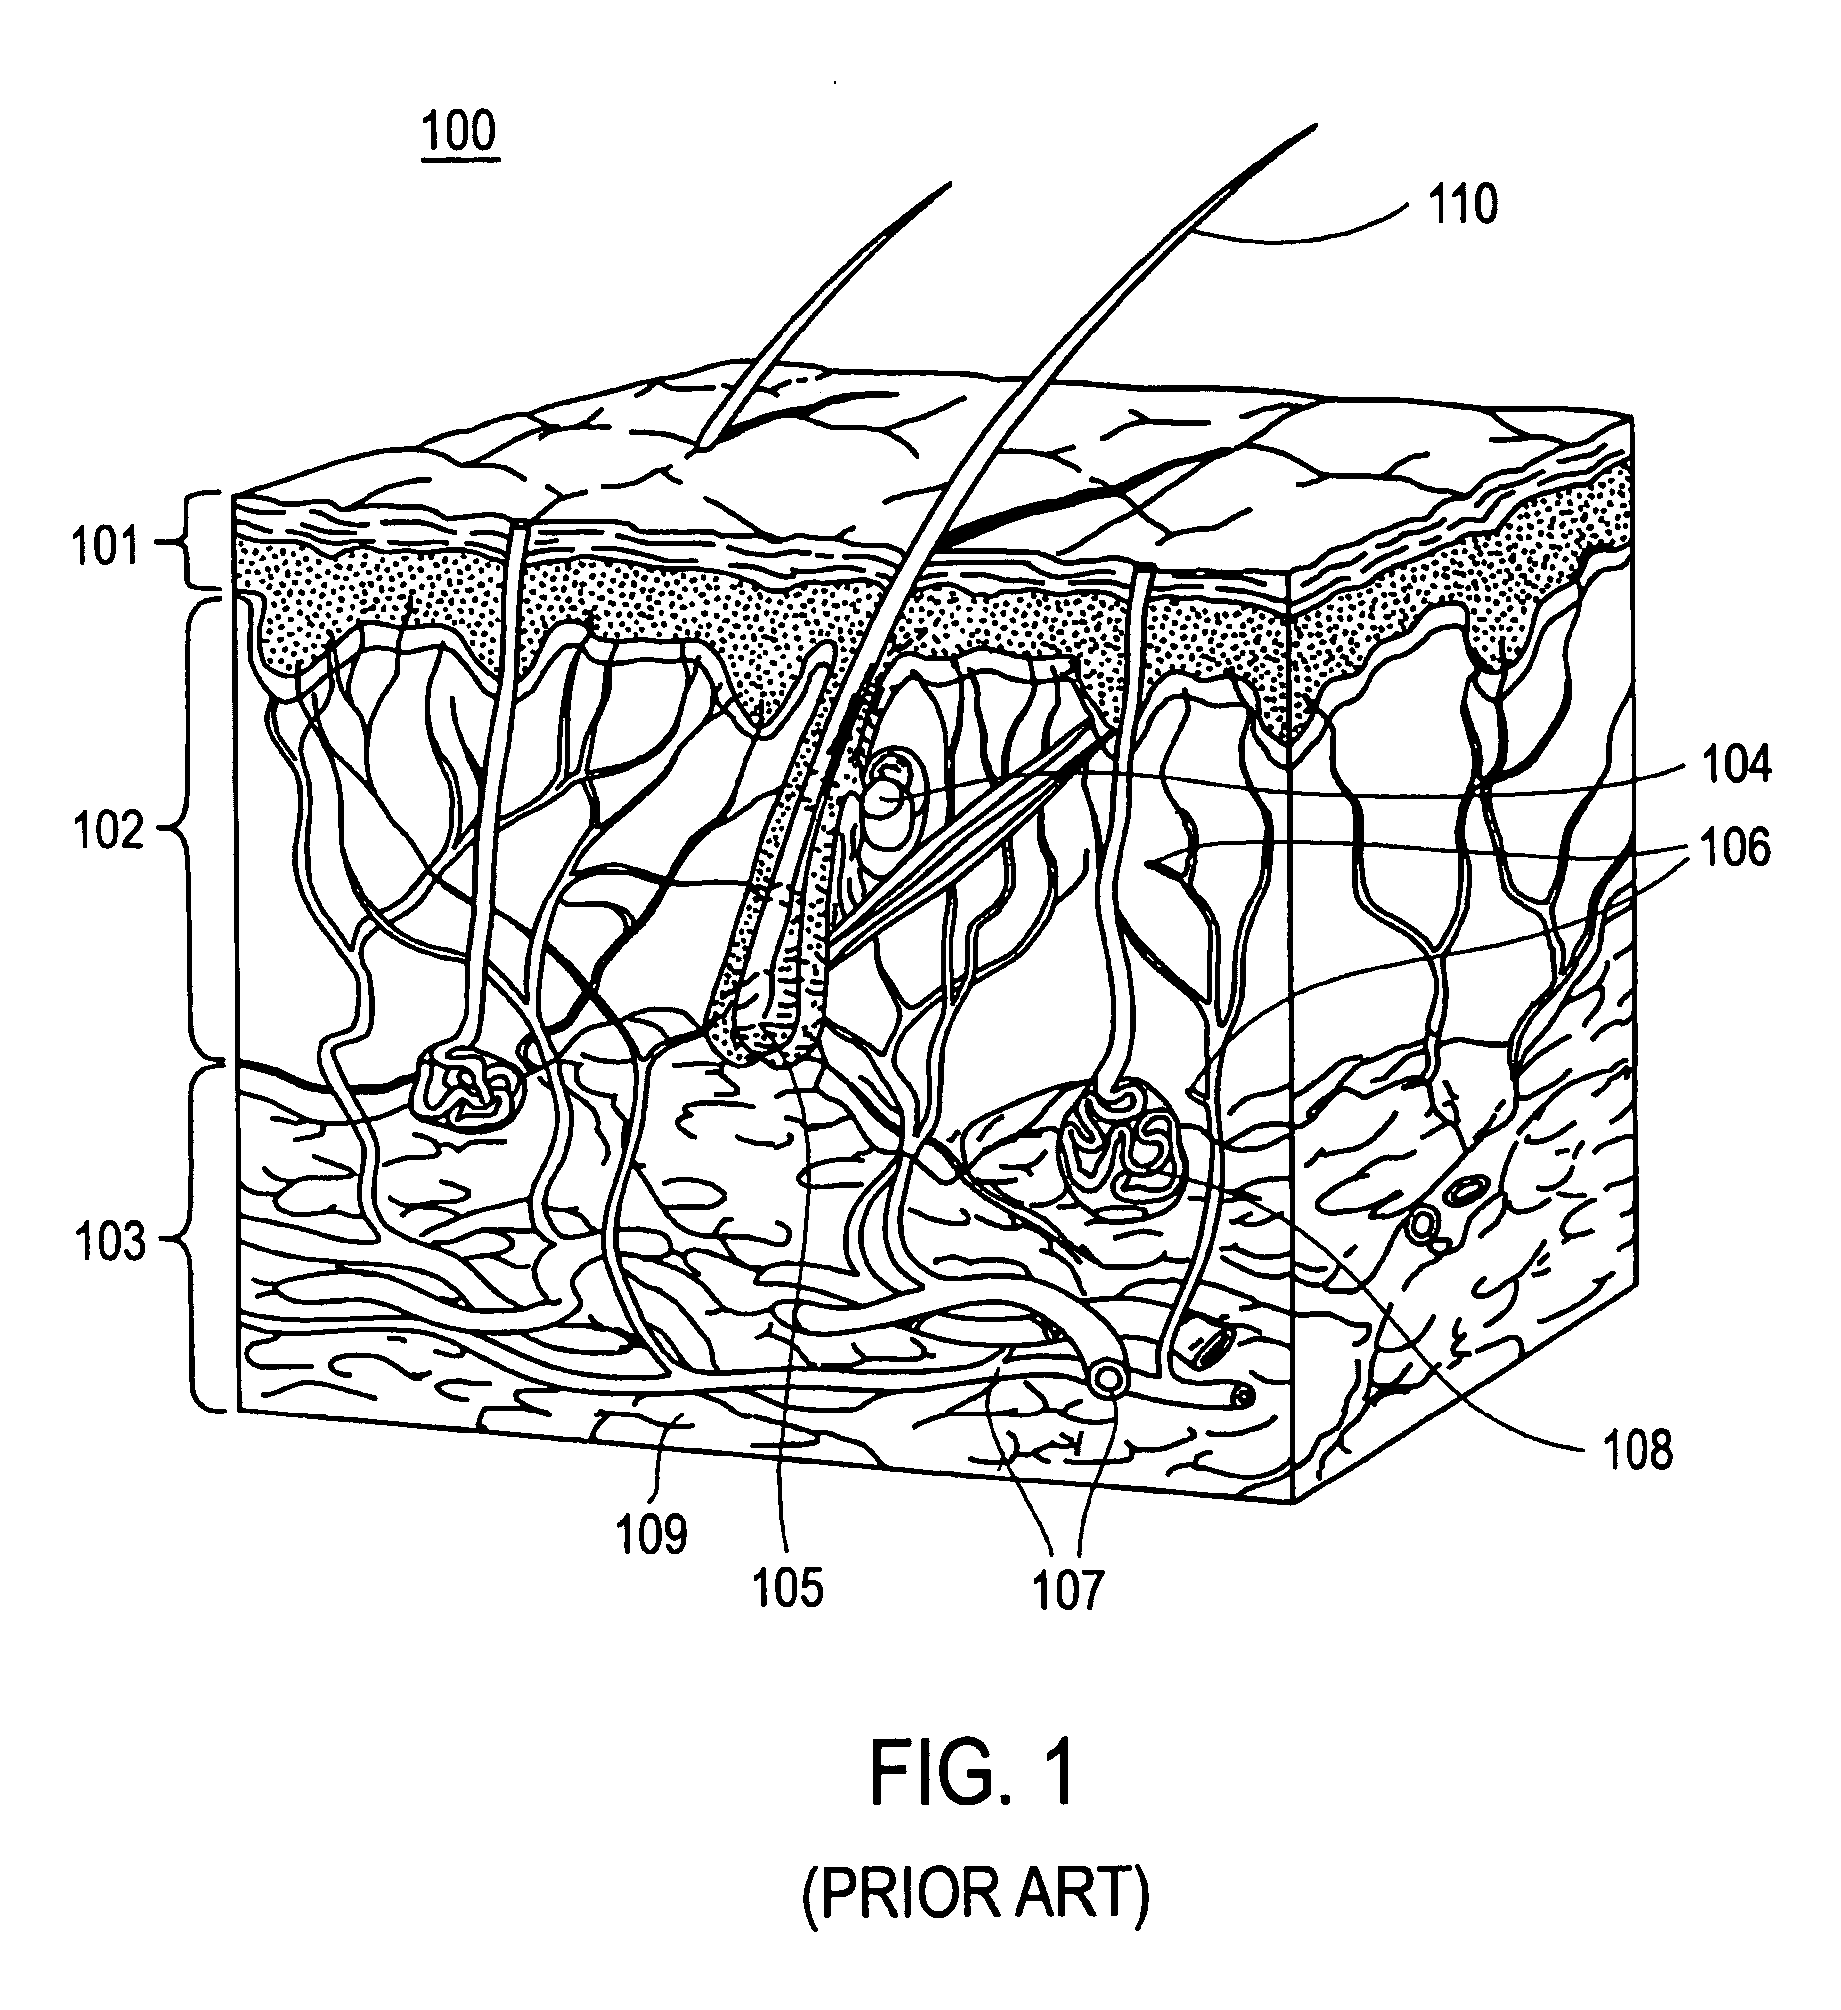 Apparatus and method to apply substances to tissue